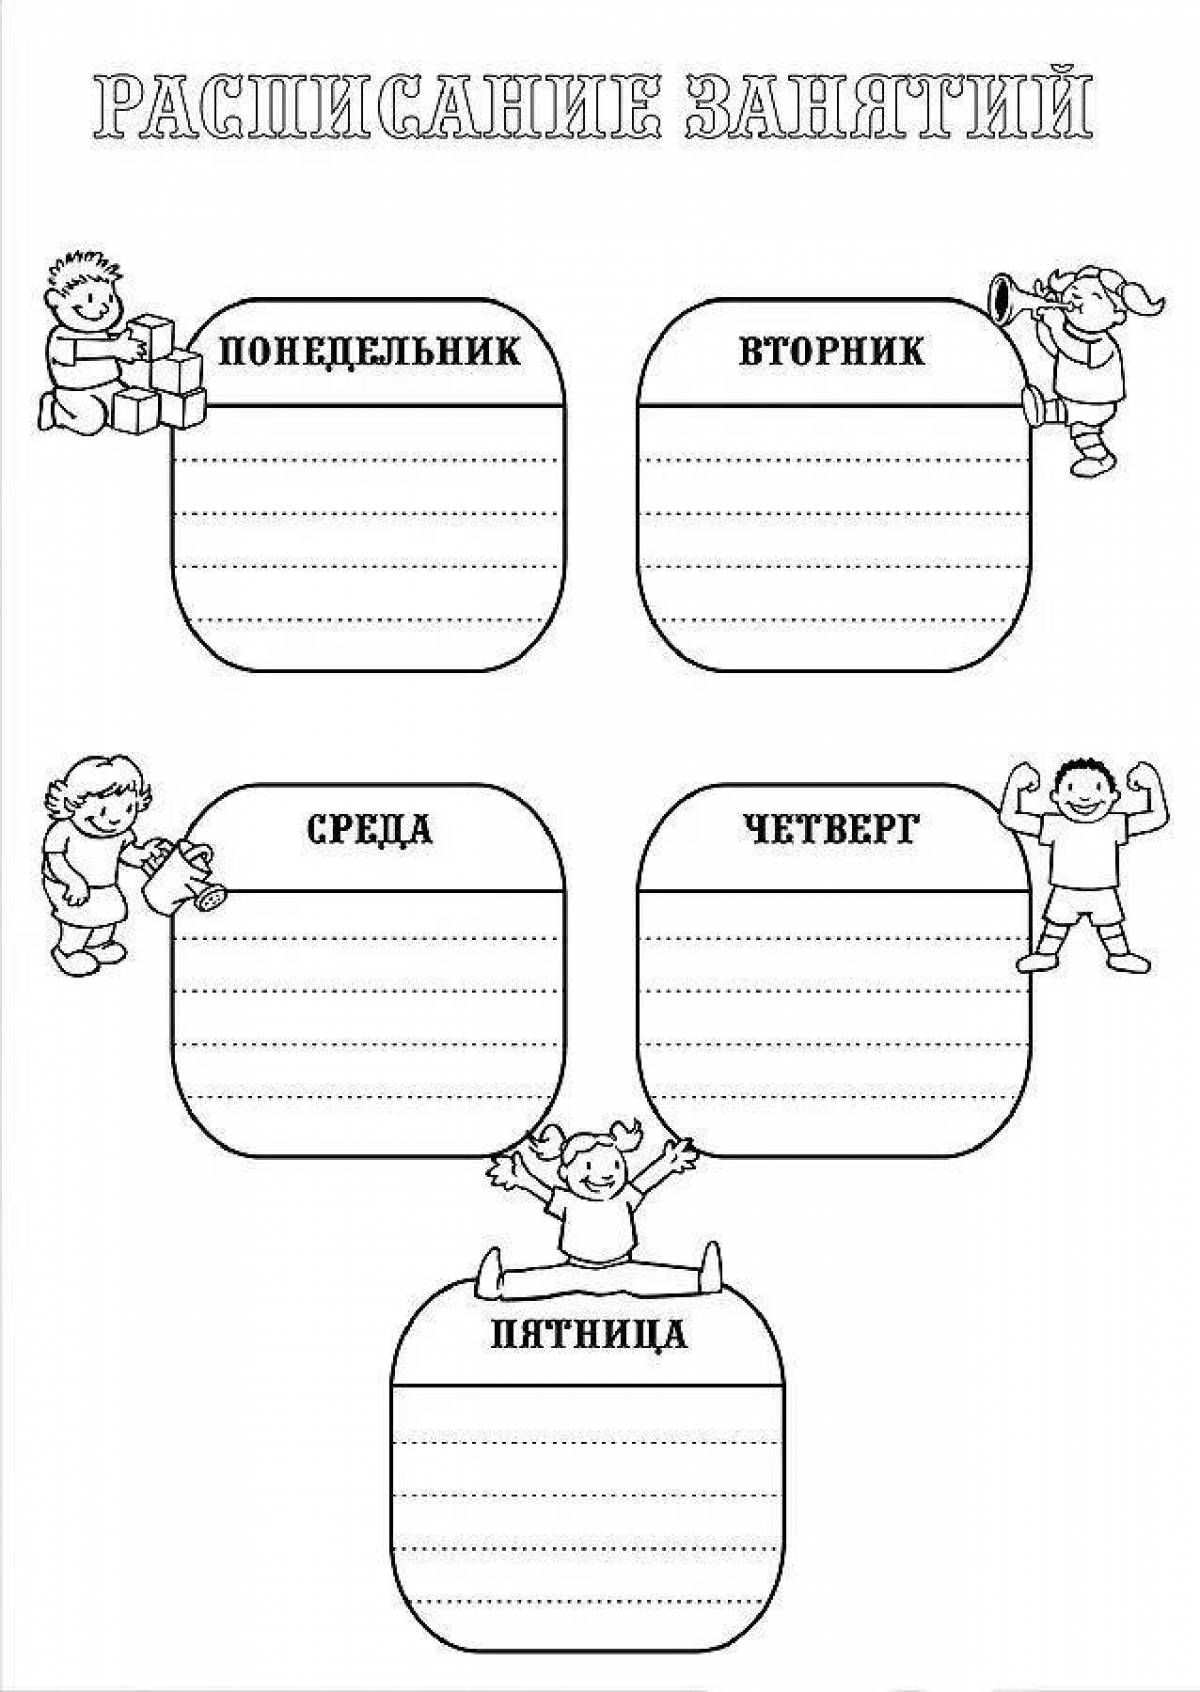 Creative schedule coloring page